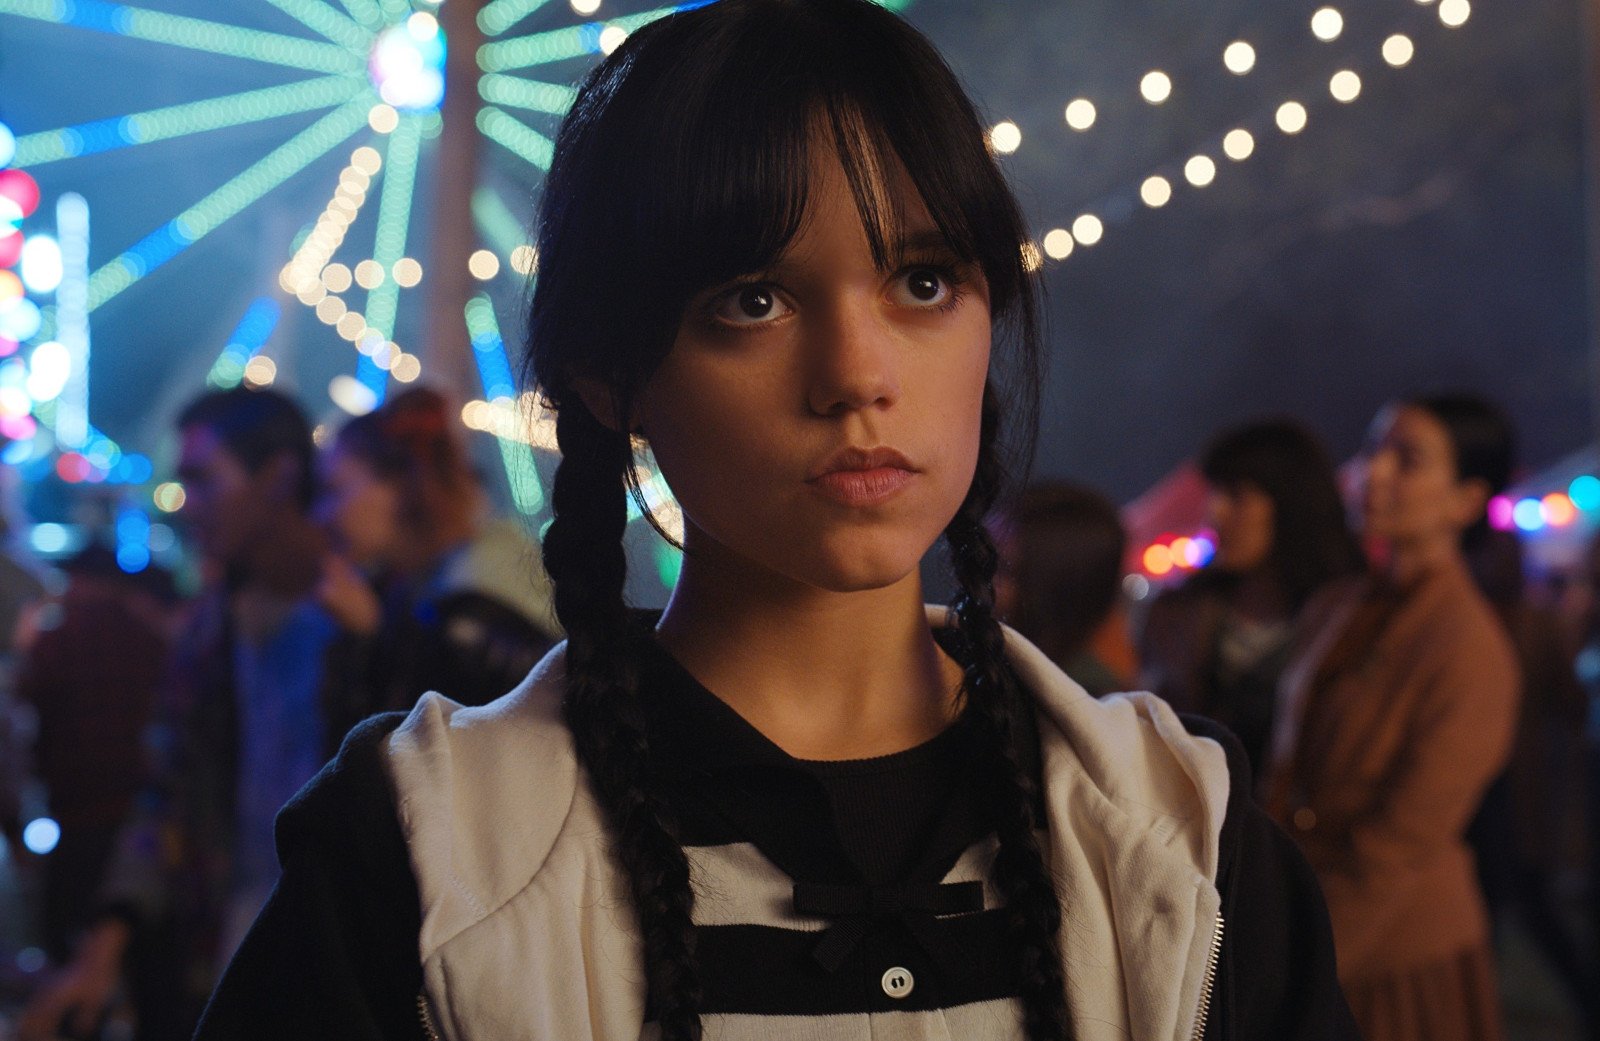 Jenna Ortega as Wednesday Addams in 'Wednesday,' which was renewed for season 2 on Netflix. Her hair is in double braids, and she's frowning at someone.